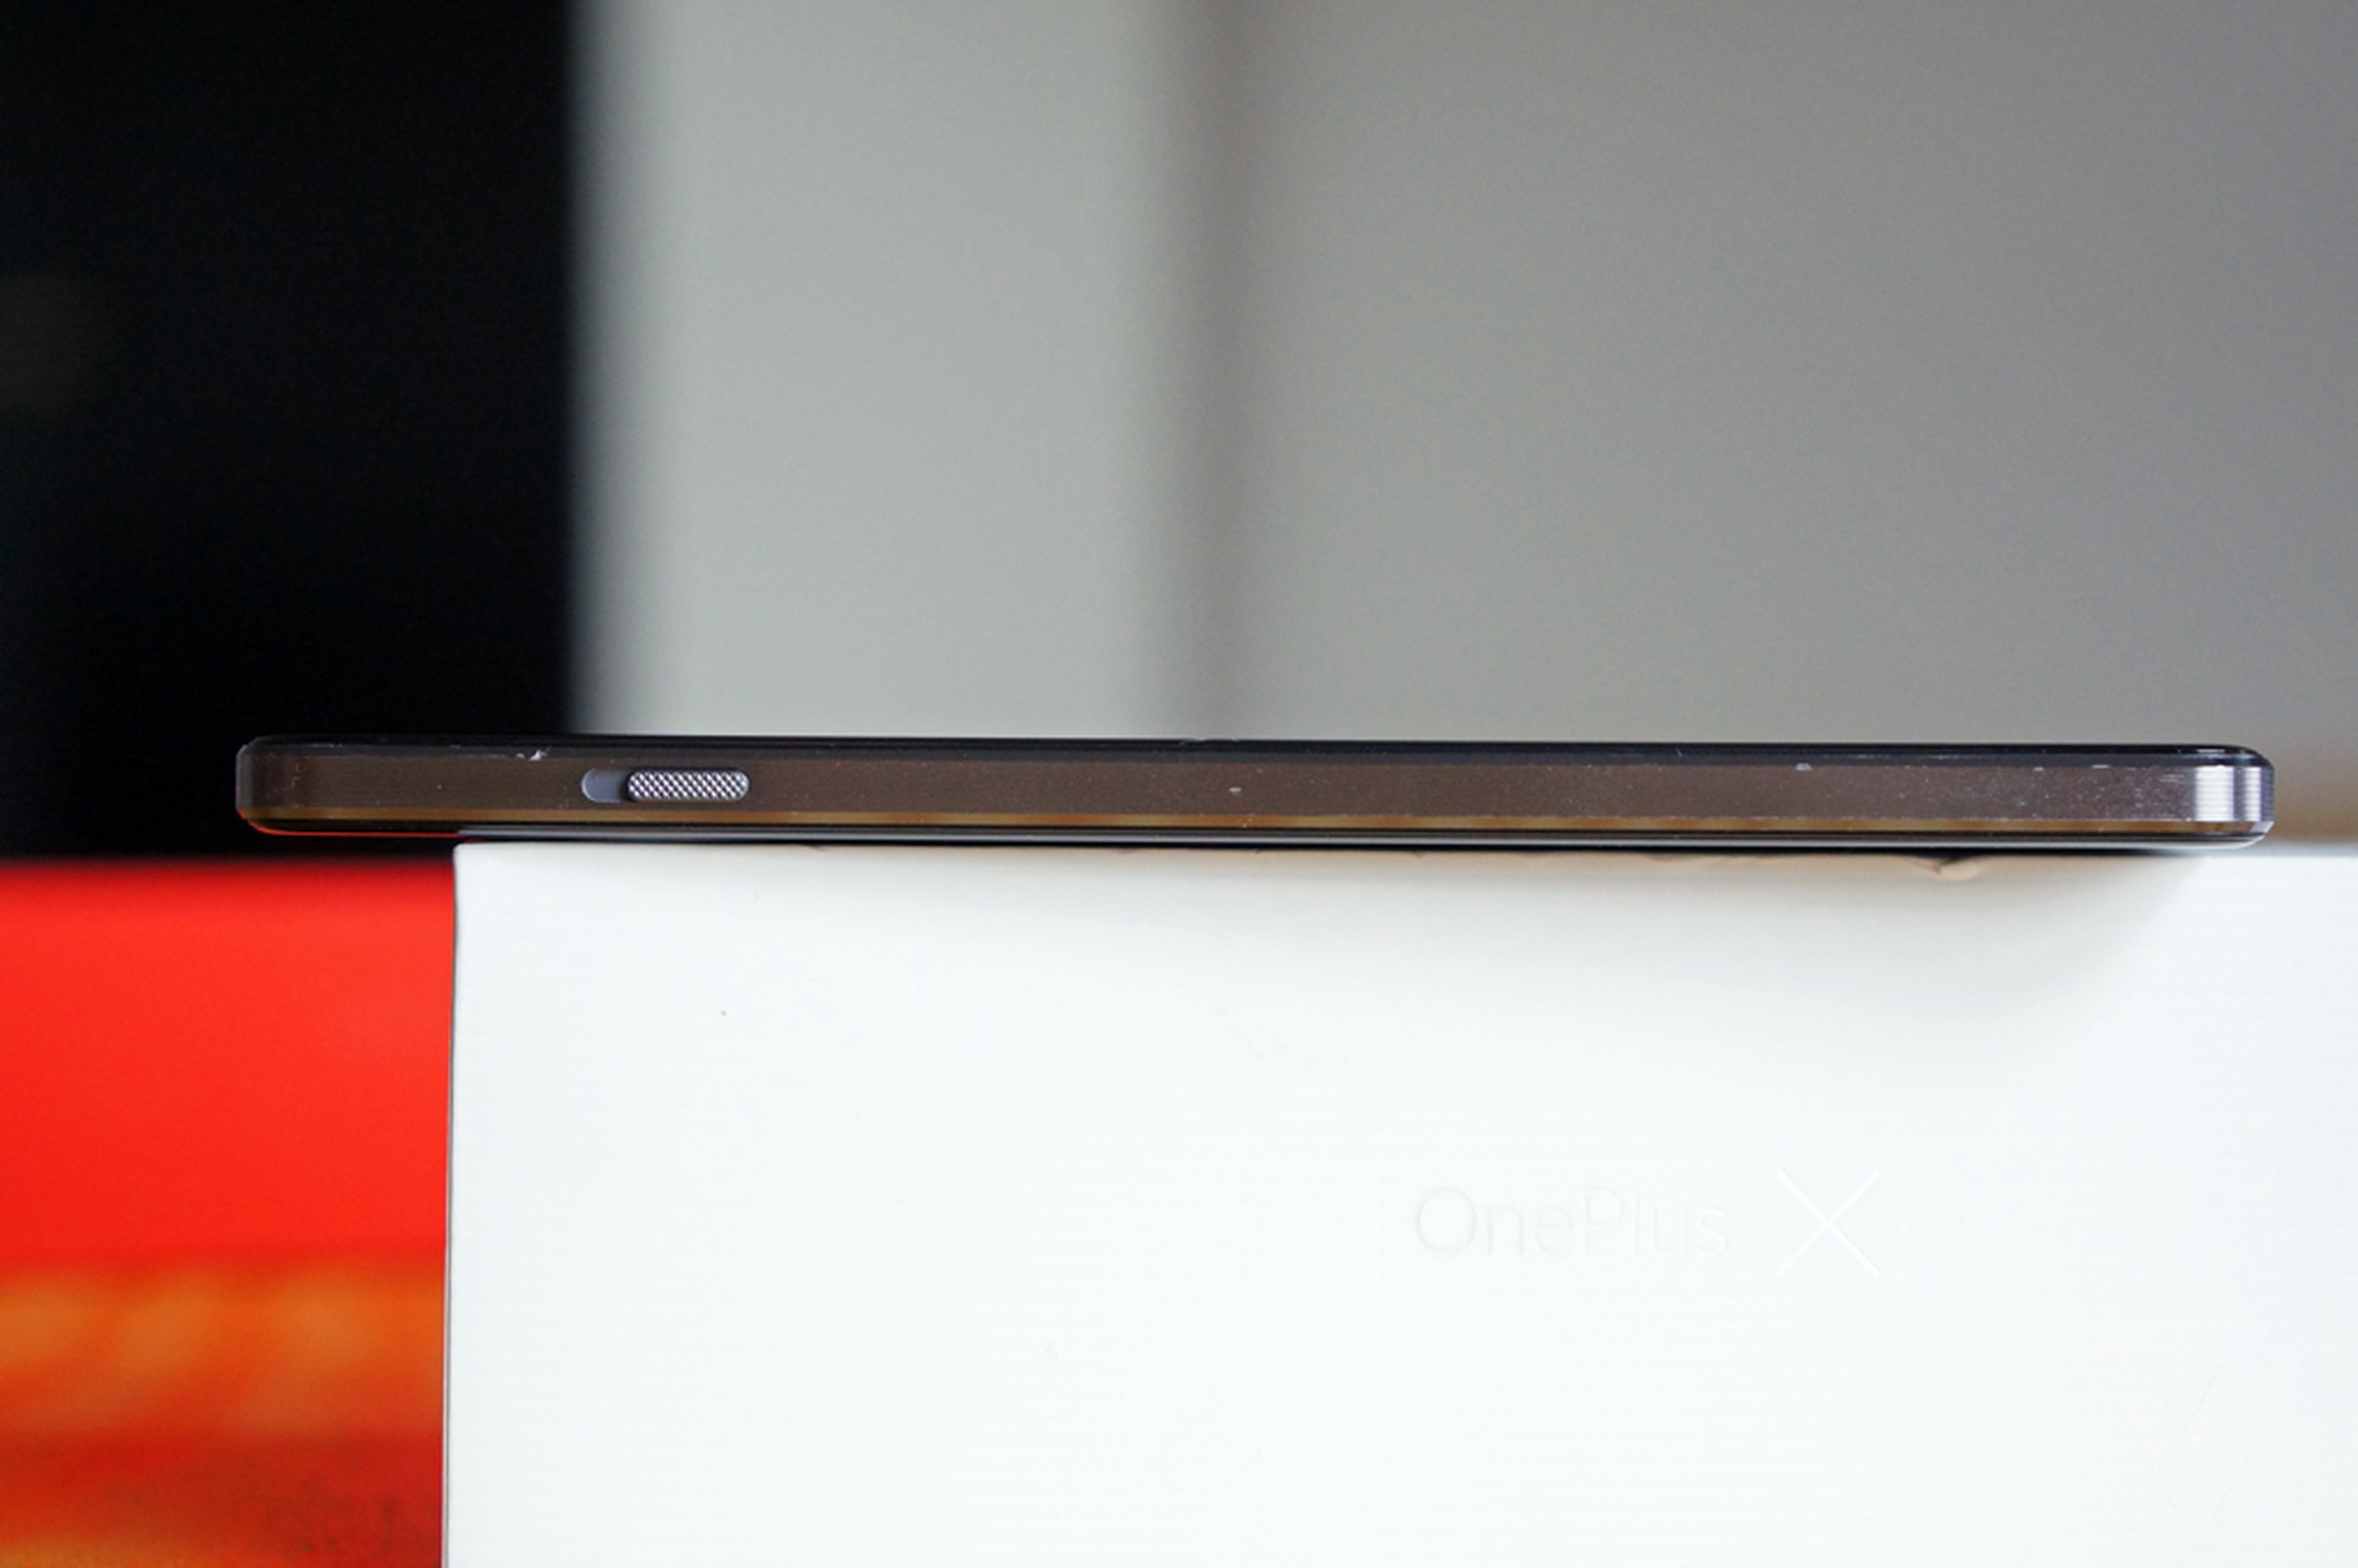 OnePlus X review gallery